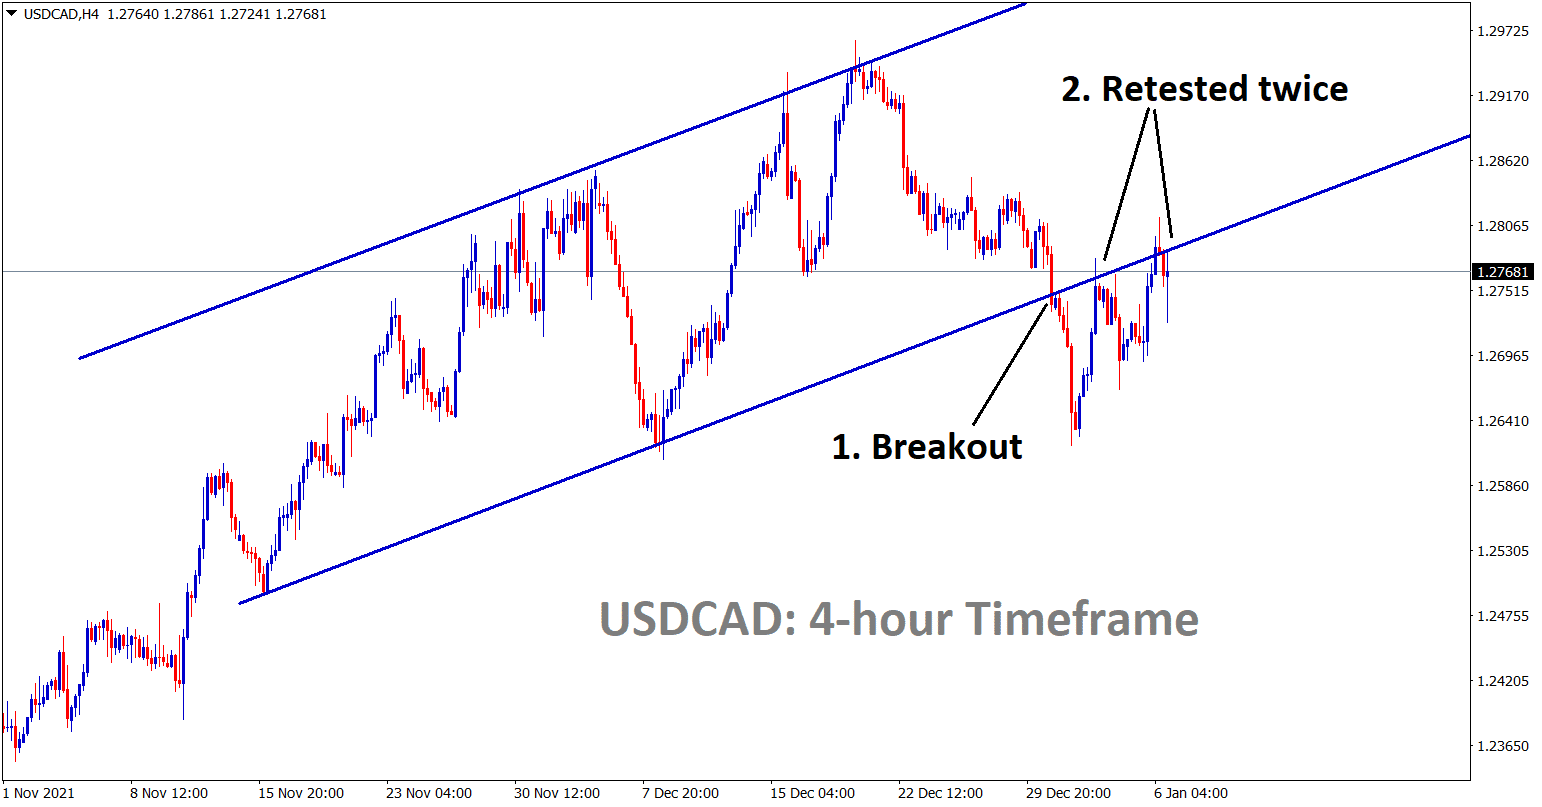 Ascending channel breakout and retest twice on USD CAD